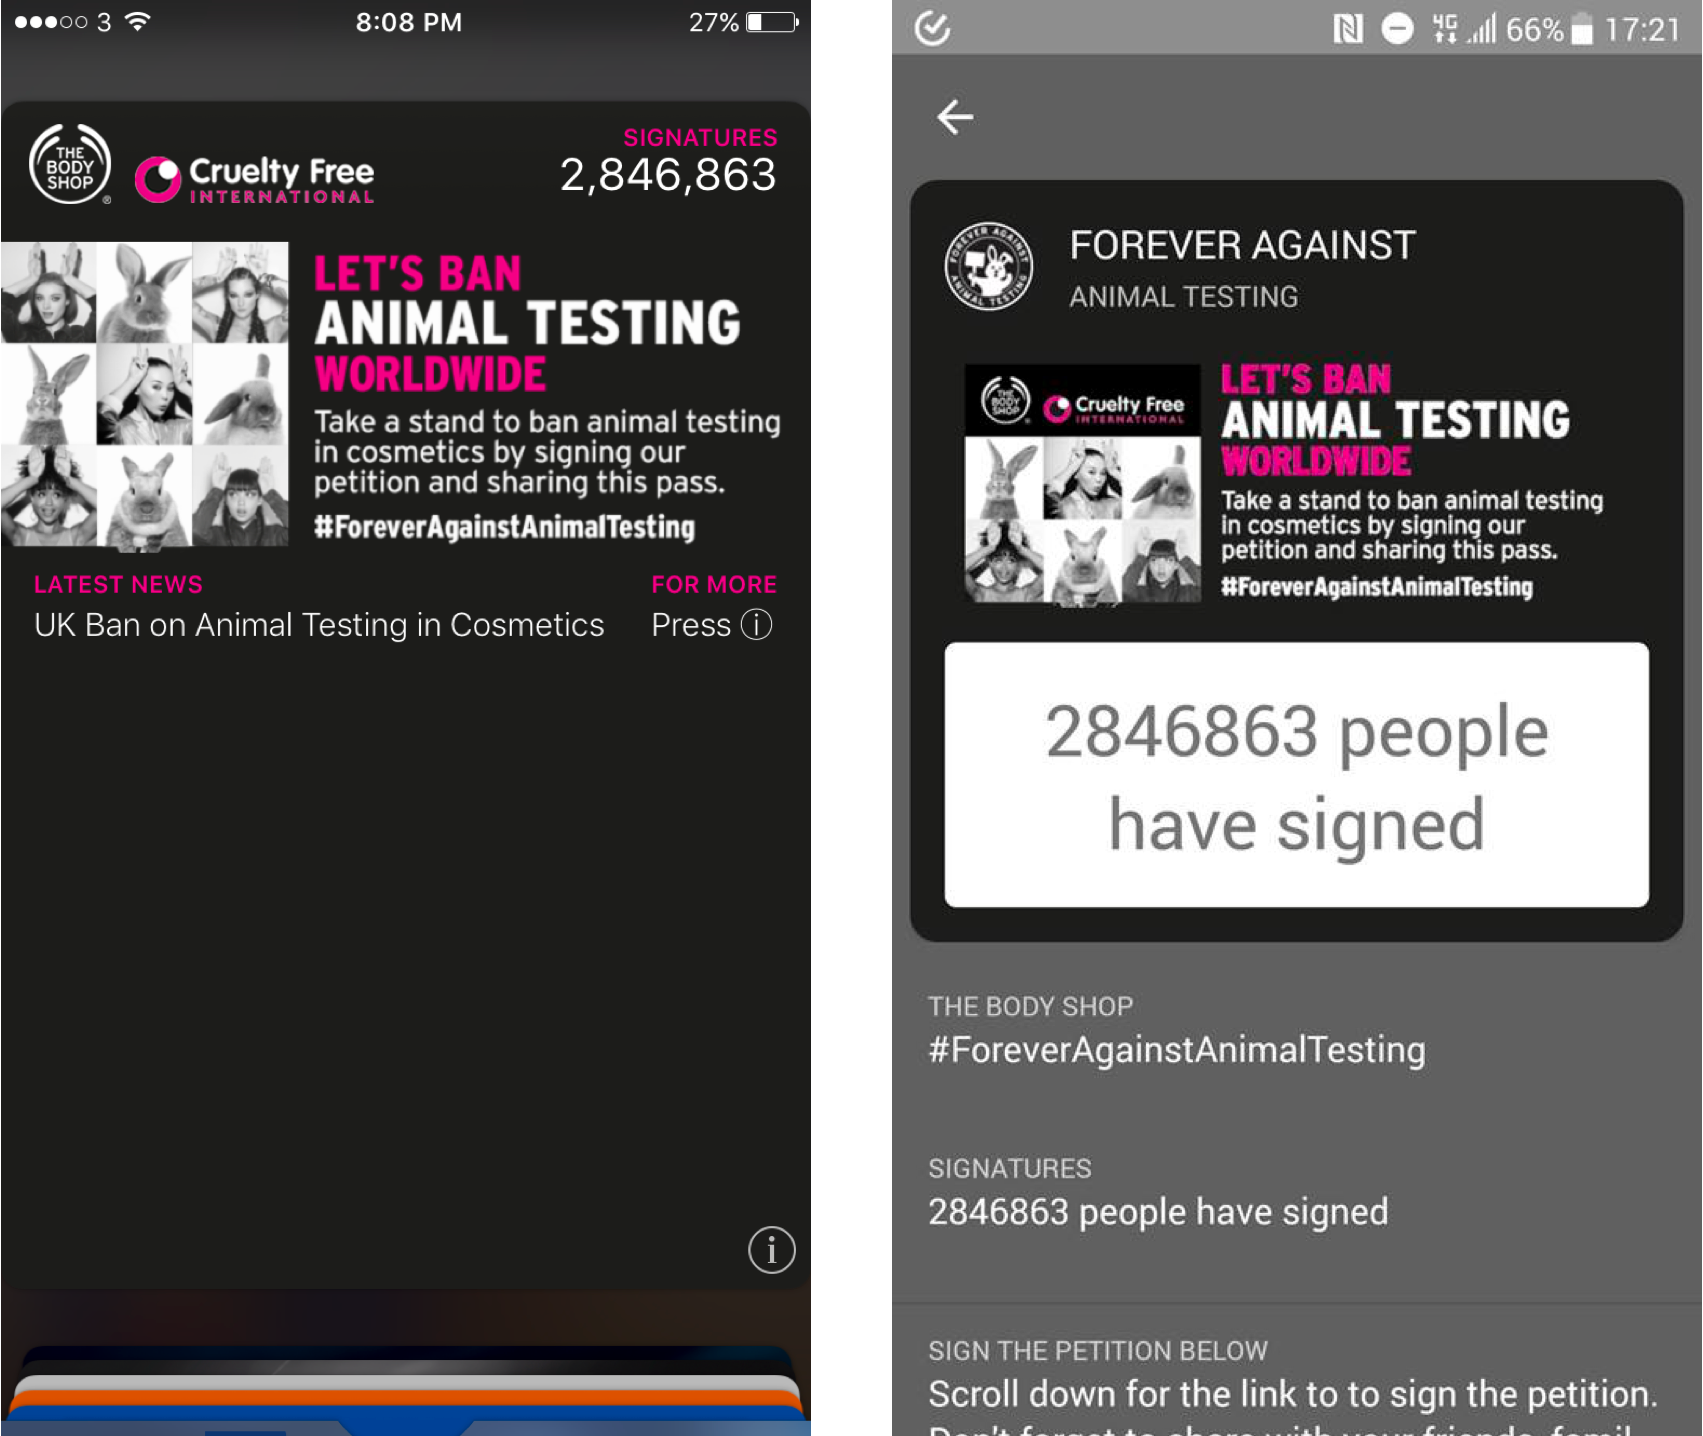 The Forever Against Animal Testing mobile wallet pass for iOS (left) and Android (right)